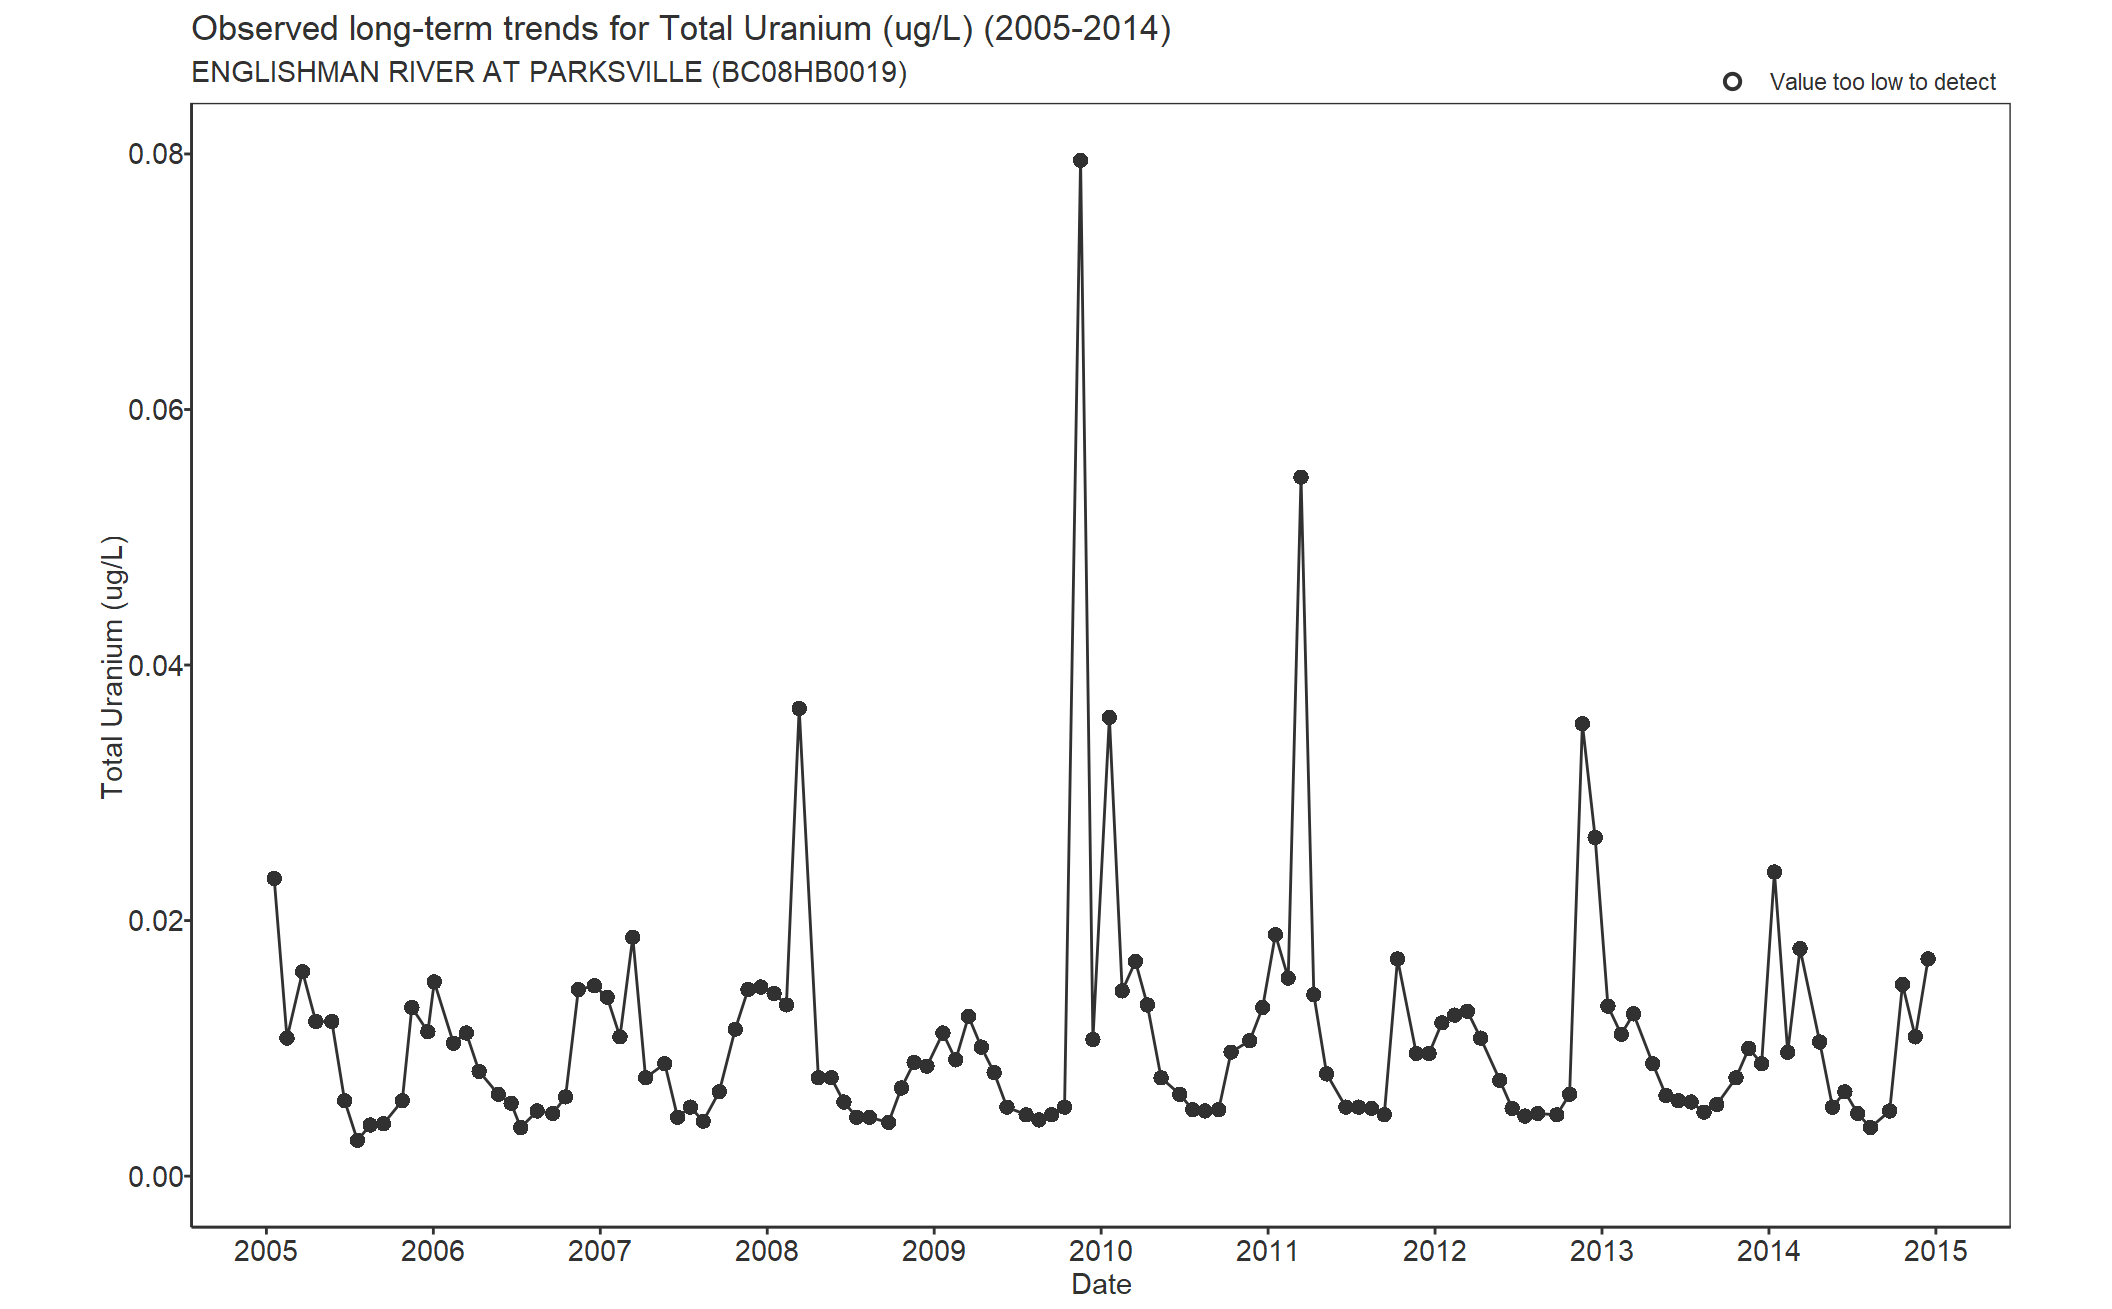 Observed long-term trends for Total Uranium (2005-2014)